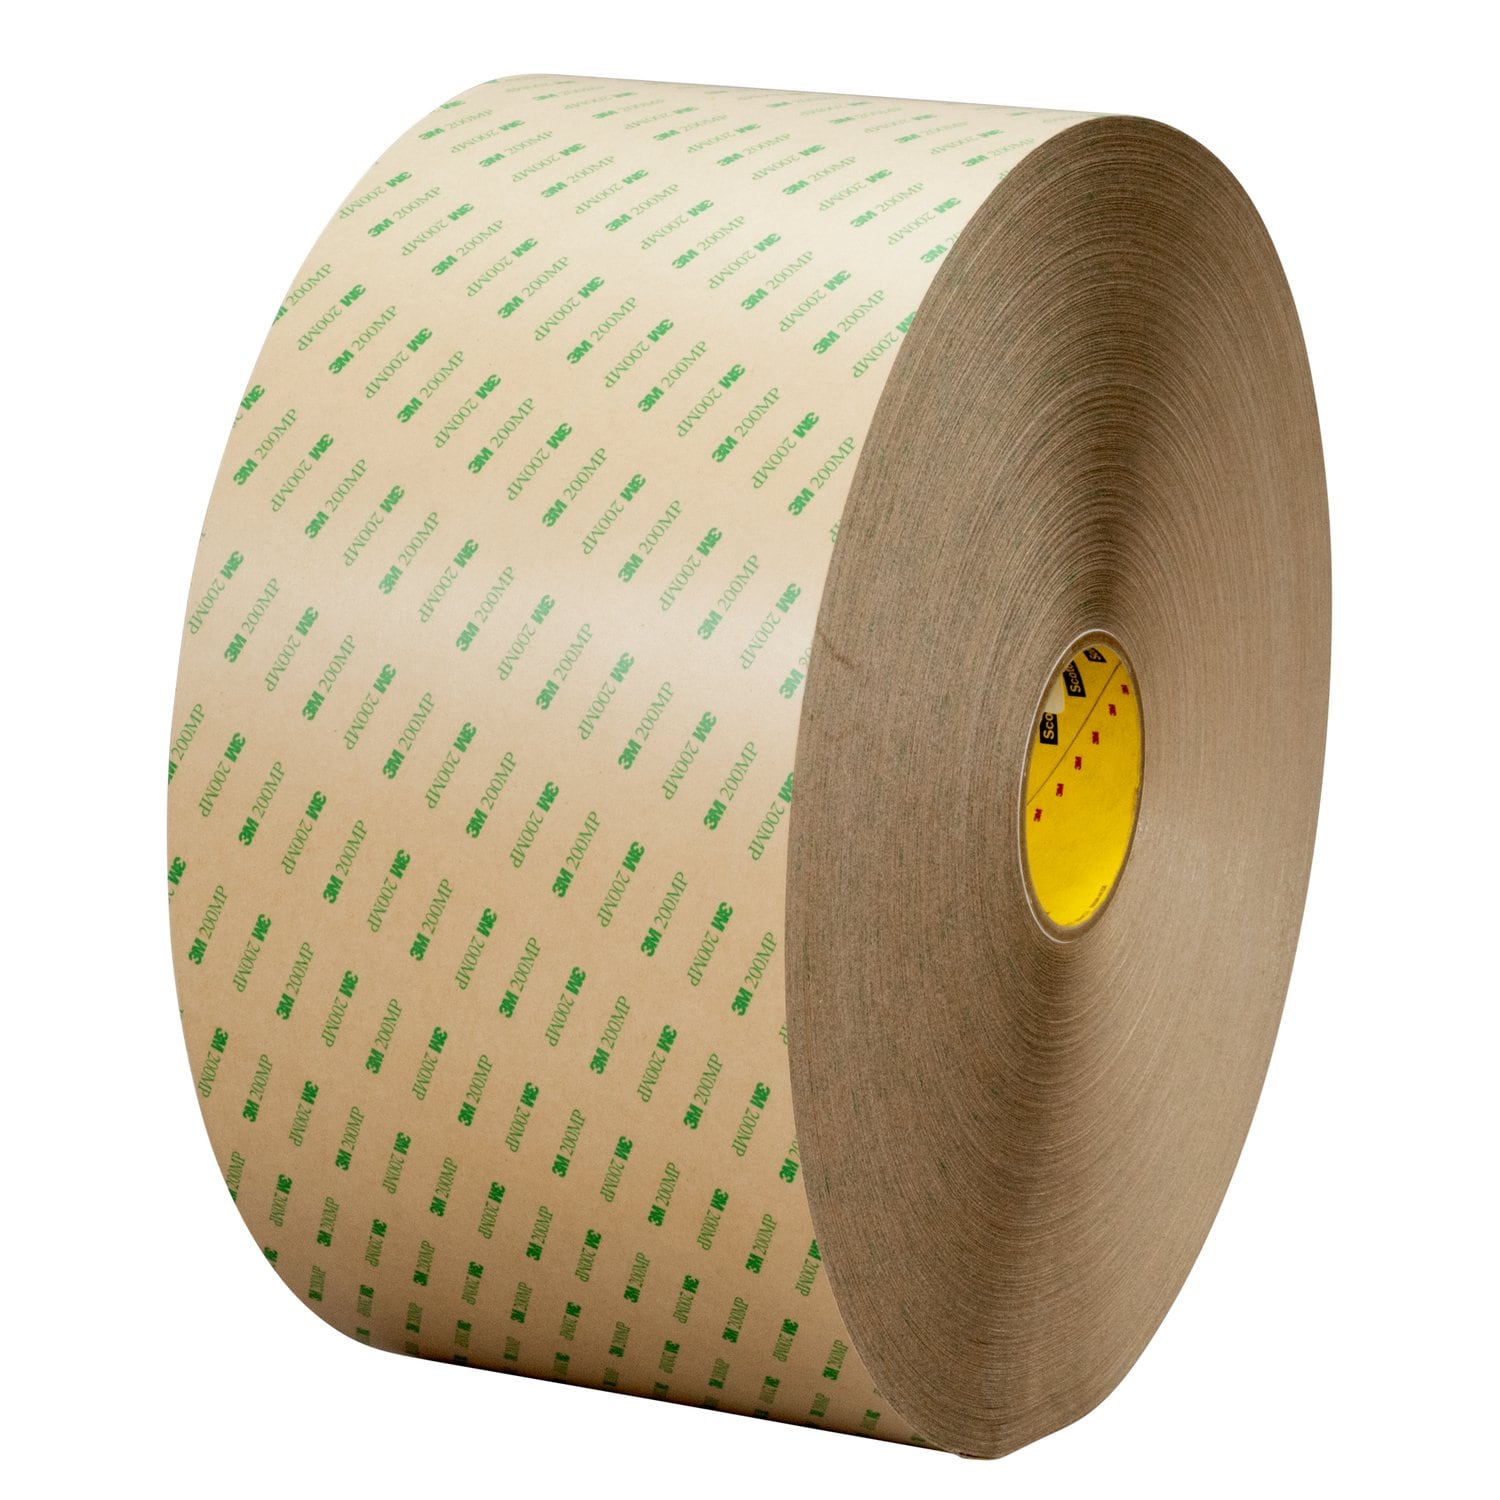 7100012735 - 3M Adhesive Transfer Tape 9668MP, Clear, 5 mil, Roll, Config